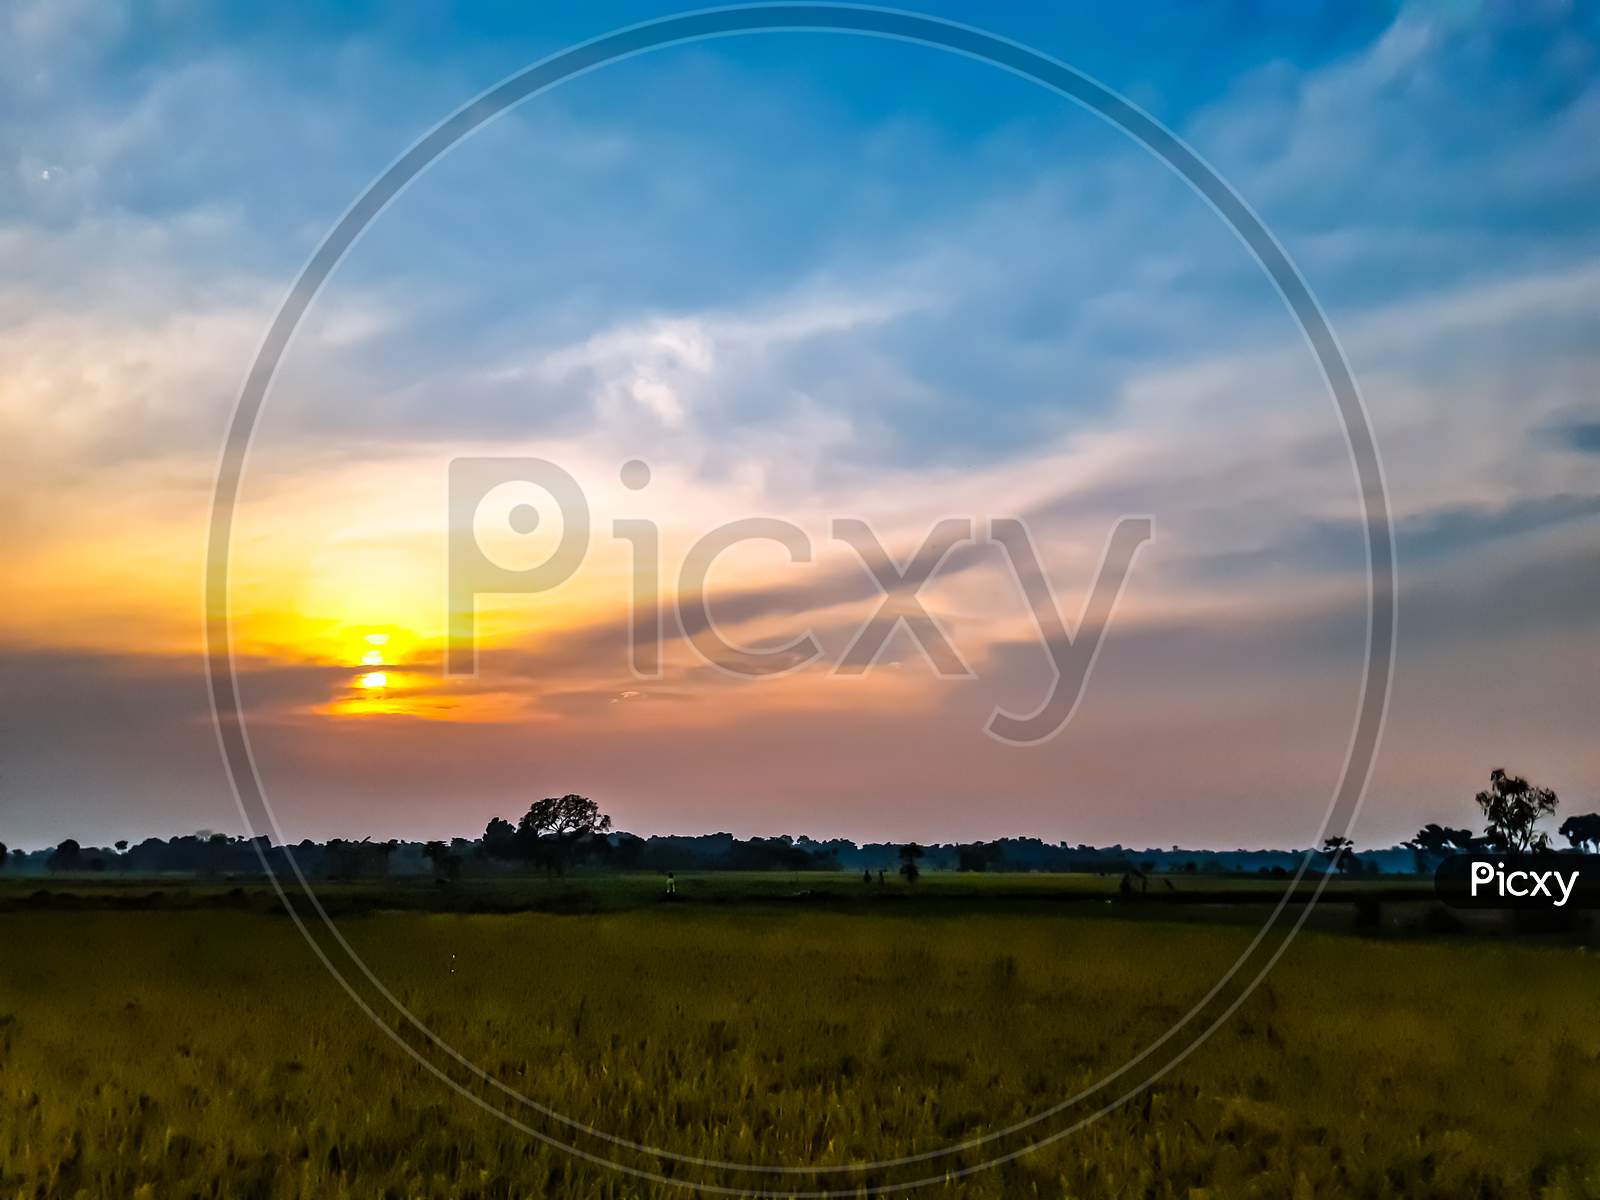 Indian Farmland And Colorful Sunshine At Sunset, White Clouds In The Blue Sky And Beautiful Surrounding